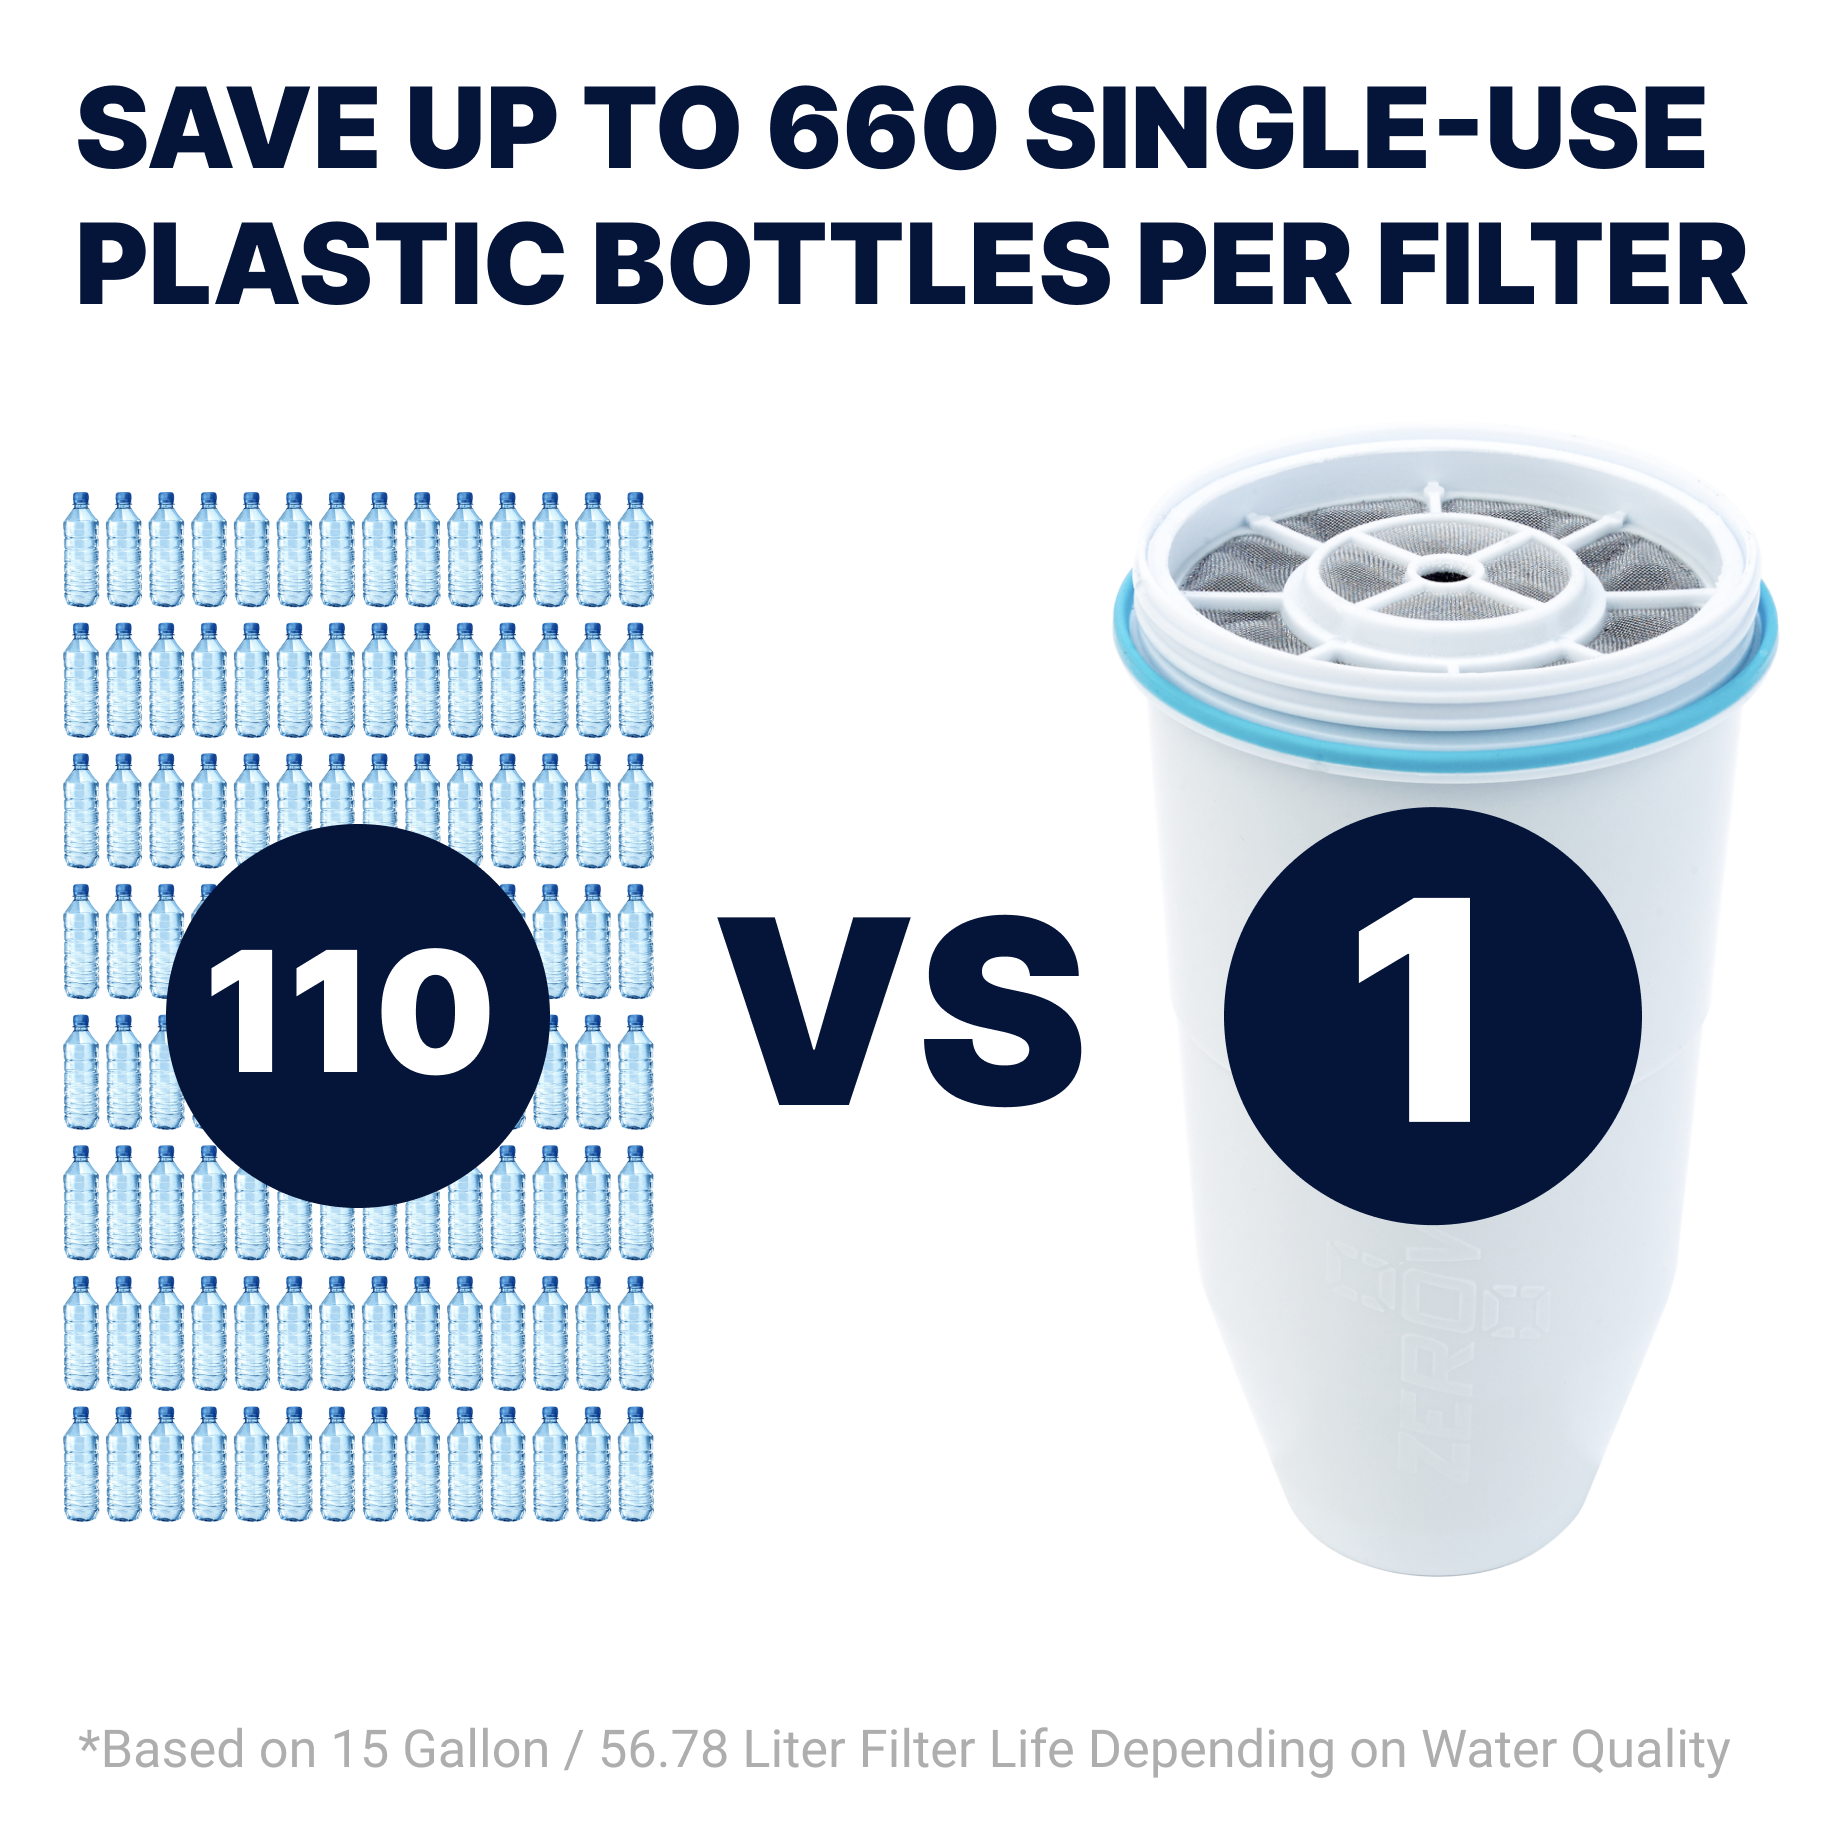 save up to 660 single use plastic water bottles per filter